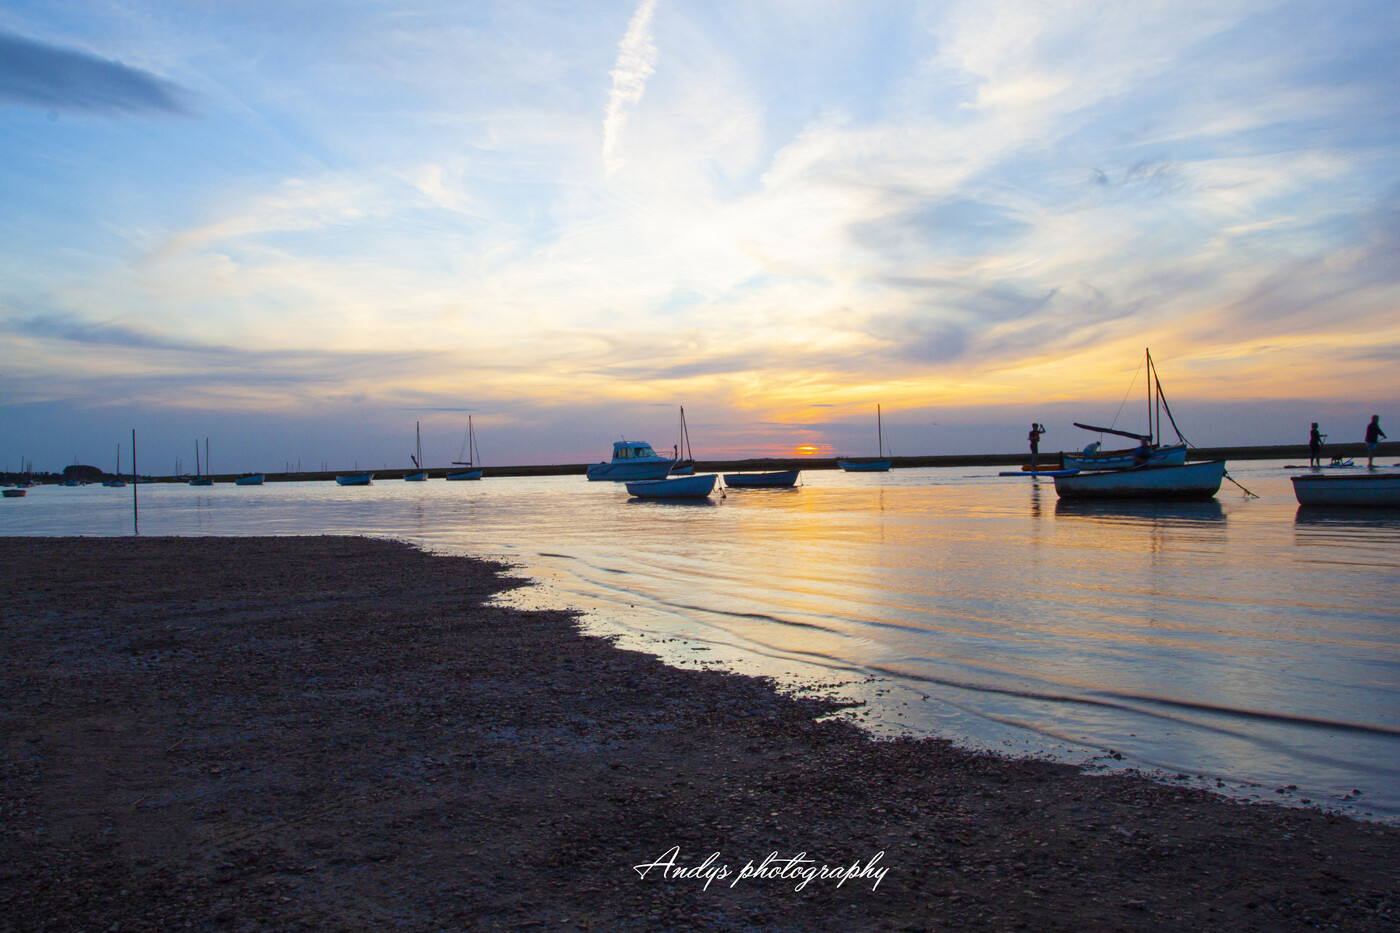 photographer andys photography landscape  photo taken at Burnham overy staithe